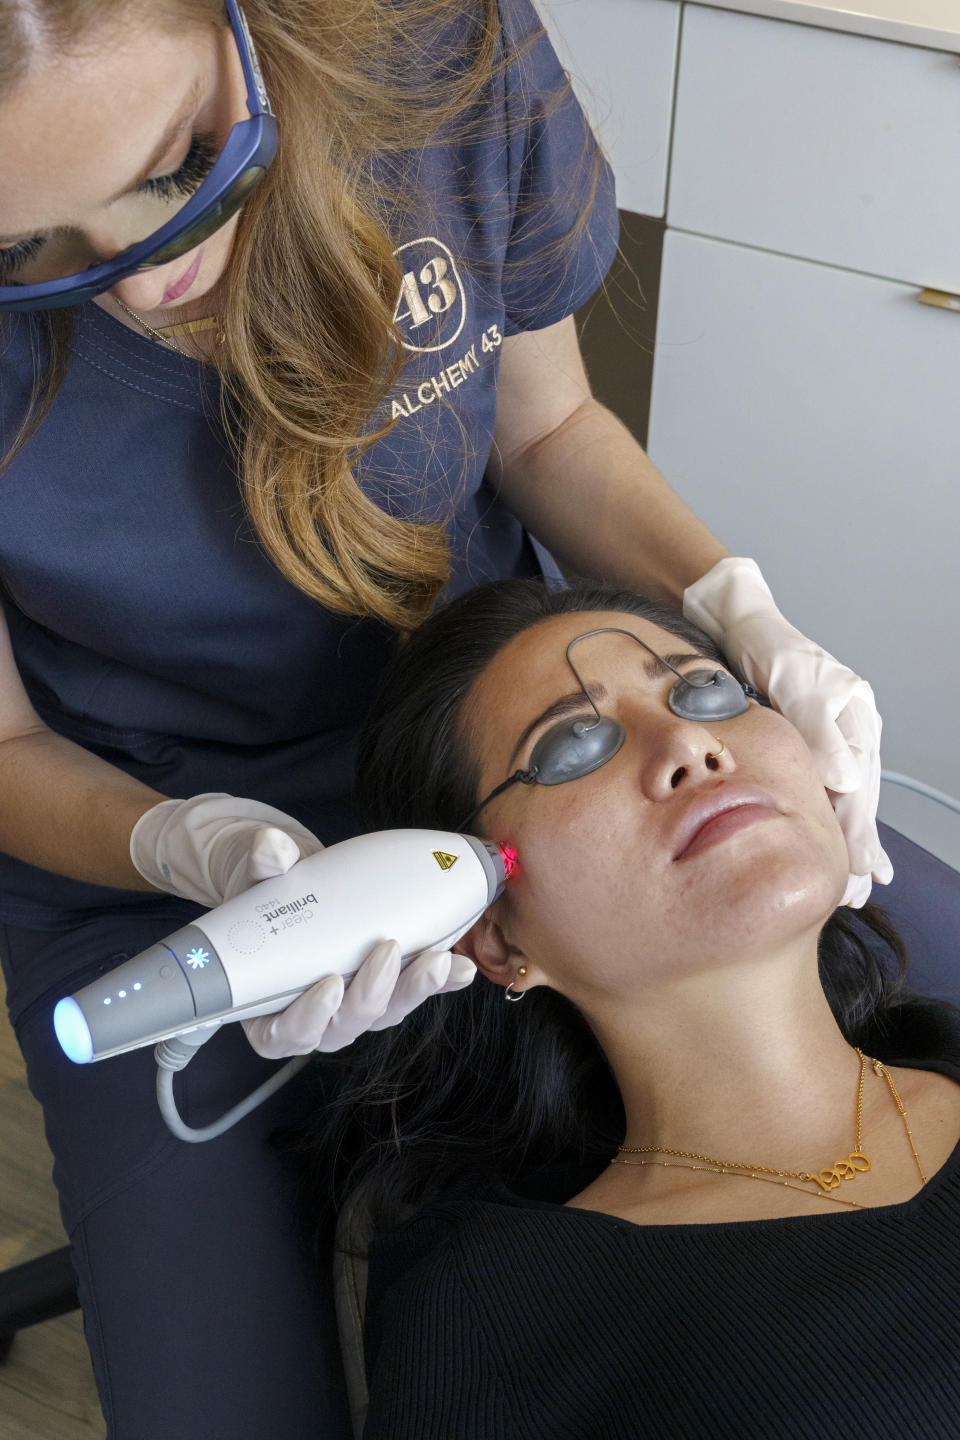 In addition to Botox and fillers, Alchemy 43 offers a select list of injectable-adjacent options, such as micro-needling. - Credit: Courtesy Photo